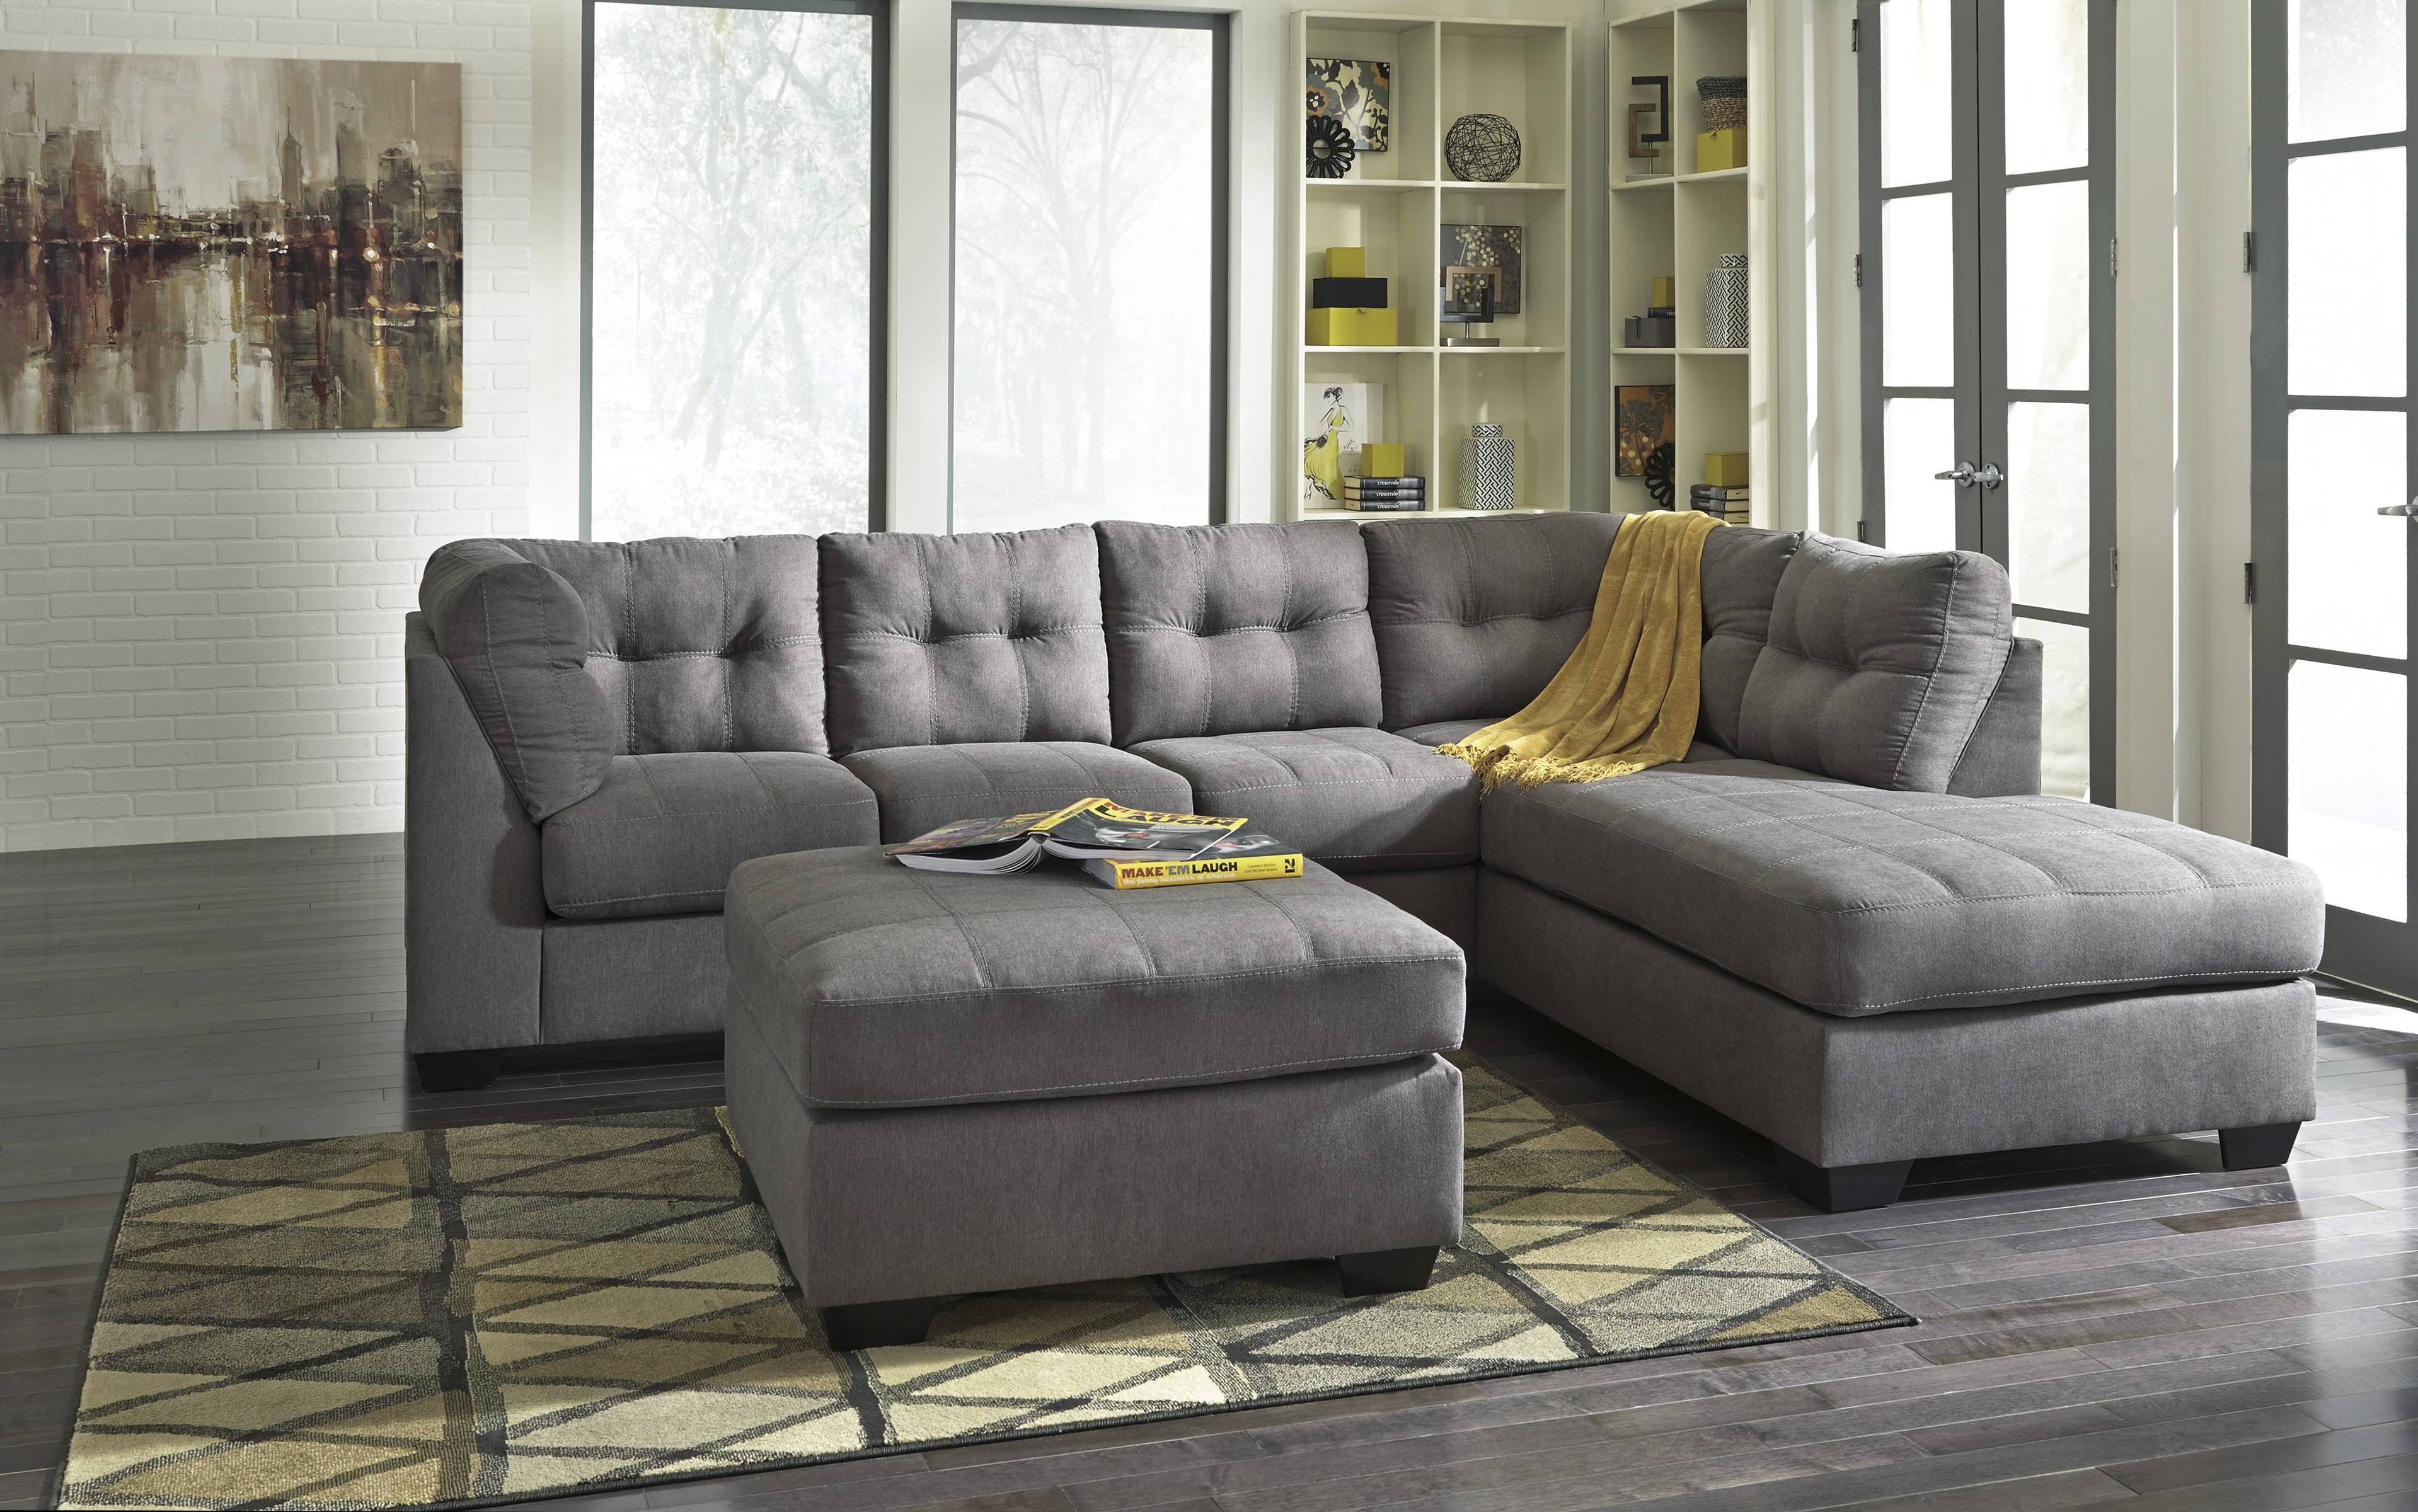 Ashley Furniture Couches Sofa Beds 17 Best In Sectional Sofas Inside Ashley Furniture Corduroy Sectional Sofas (View 3 of 15)